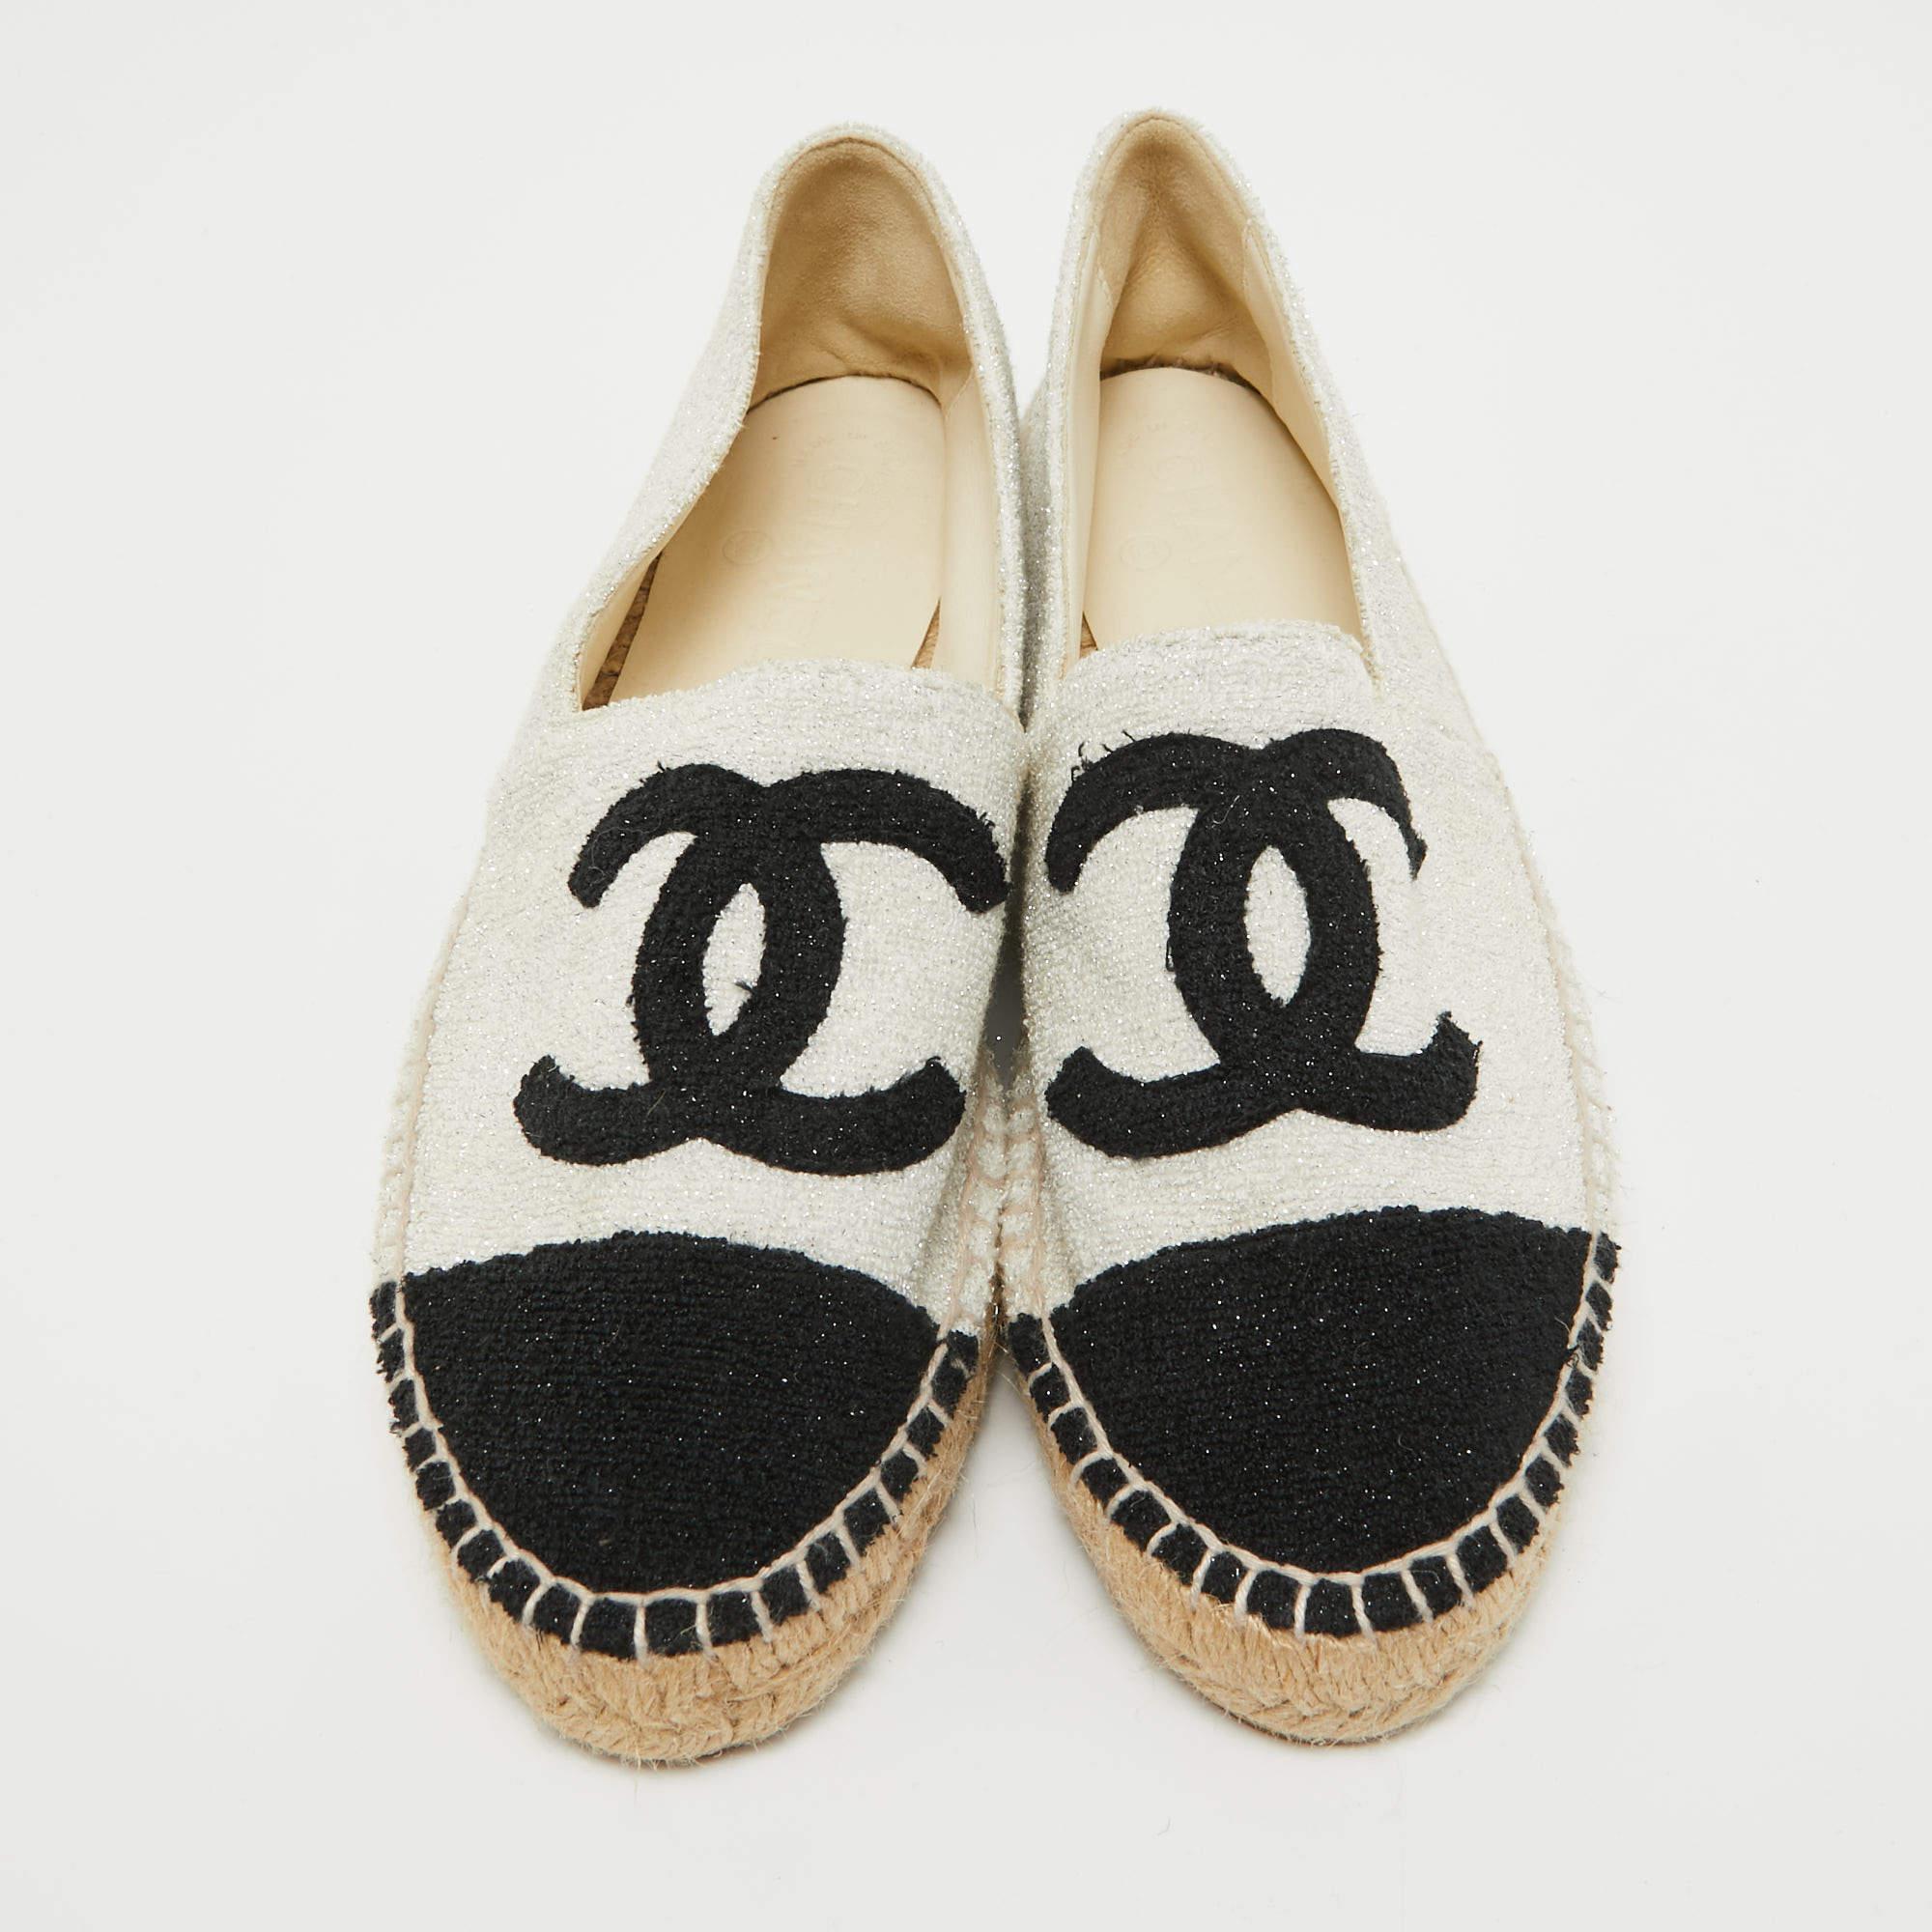 Chanel's espadrille flats epitomize timeless elegance. The luxurious wool upper, adorned with the iconic interlocking CC logo, seamlessly combines with a classic cap toe design. The espadrille detailing adds a touch of casual sophistication to these